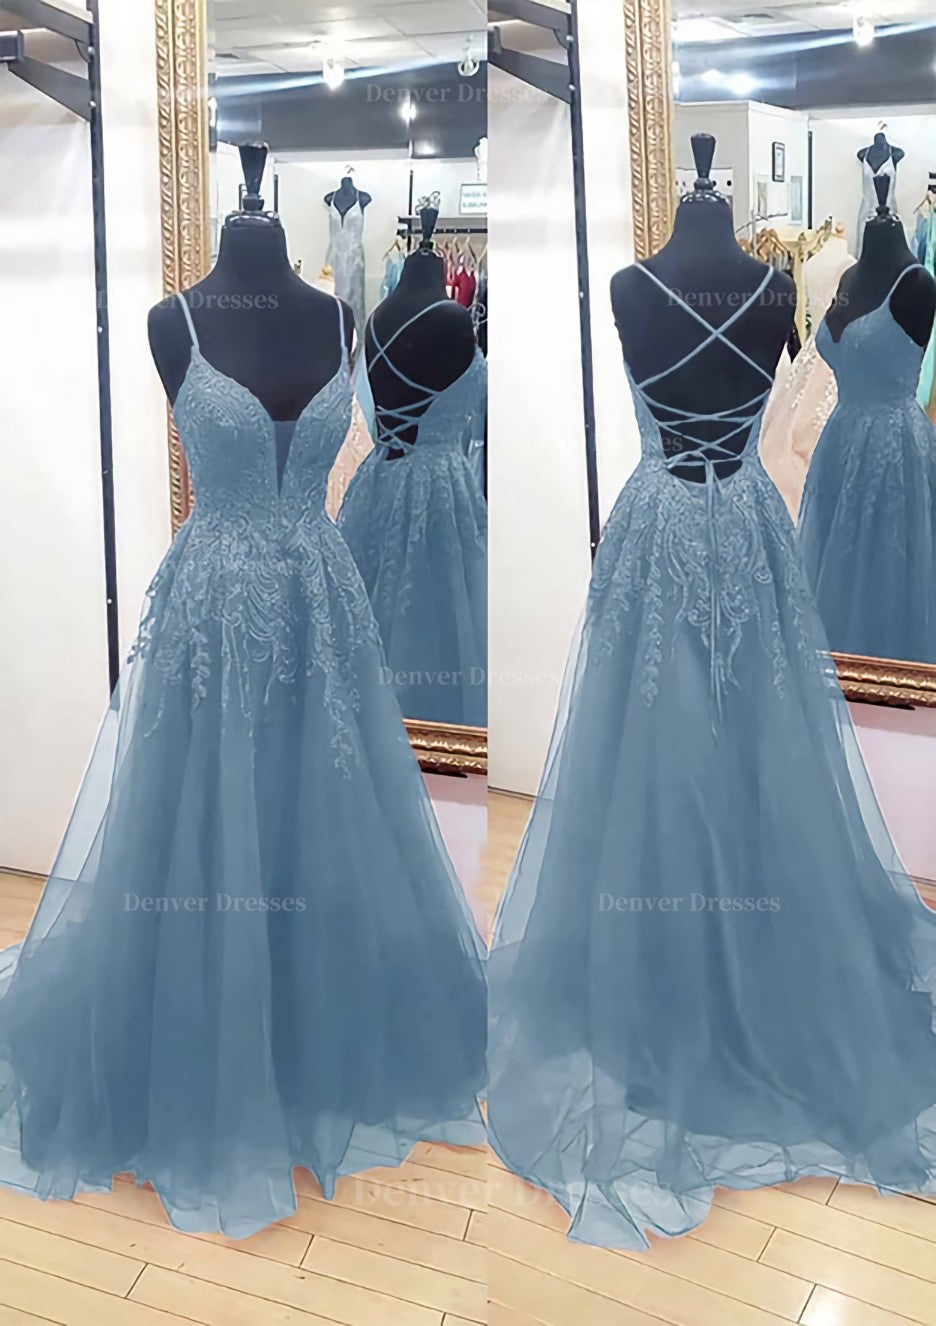 Formal Dress Short, A-line V Neck Sleeveless Chapel Train Tulle Prom Dress With Appliqued Lace